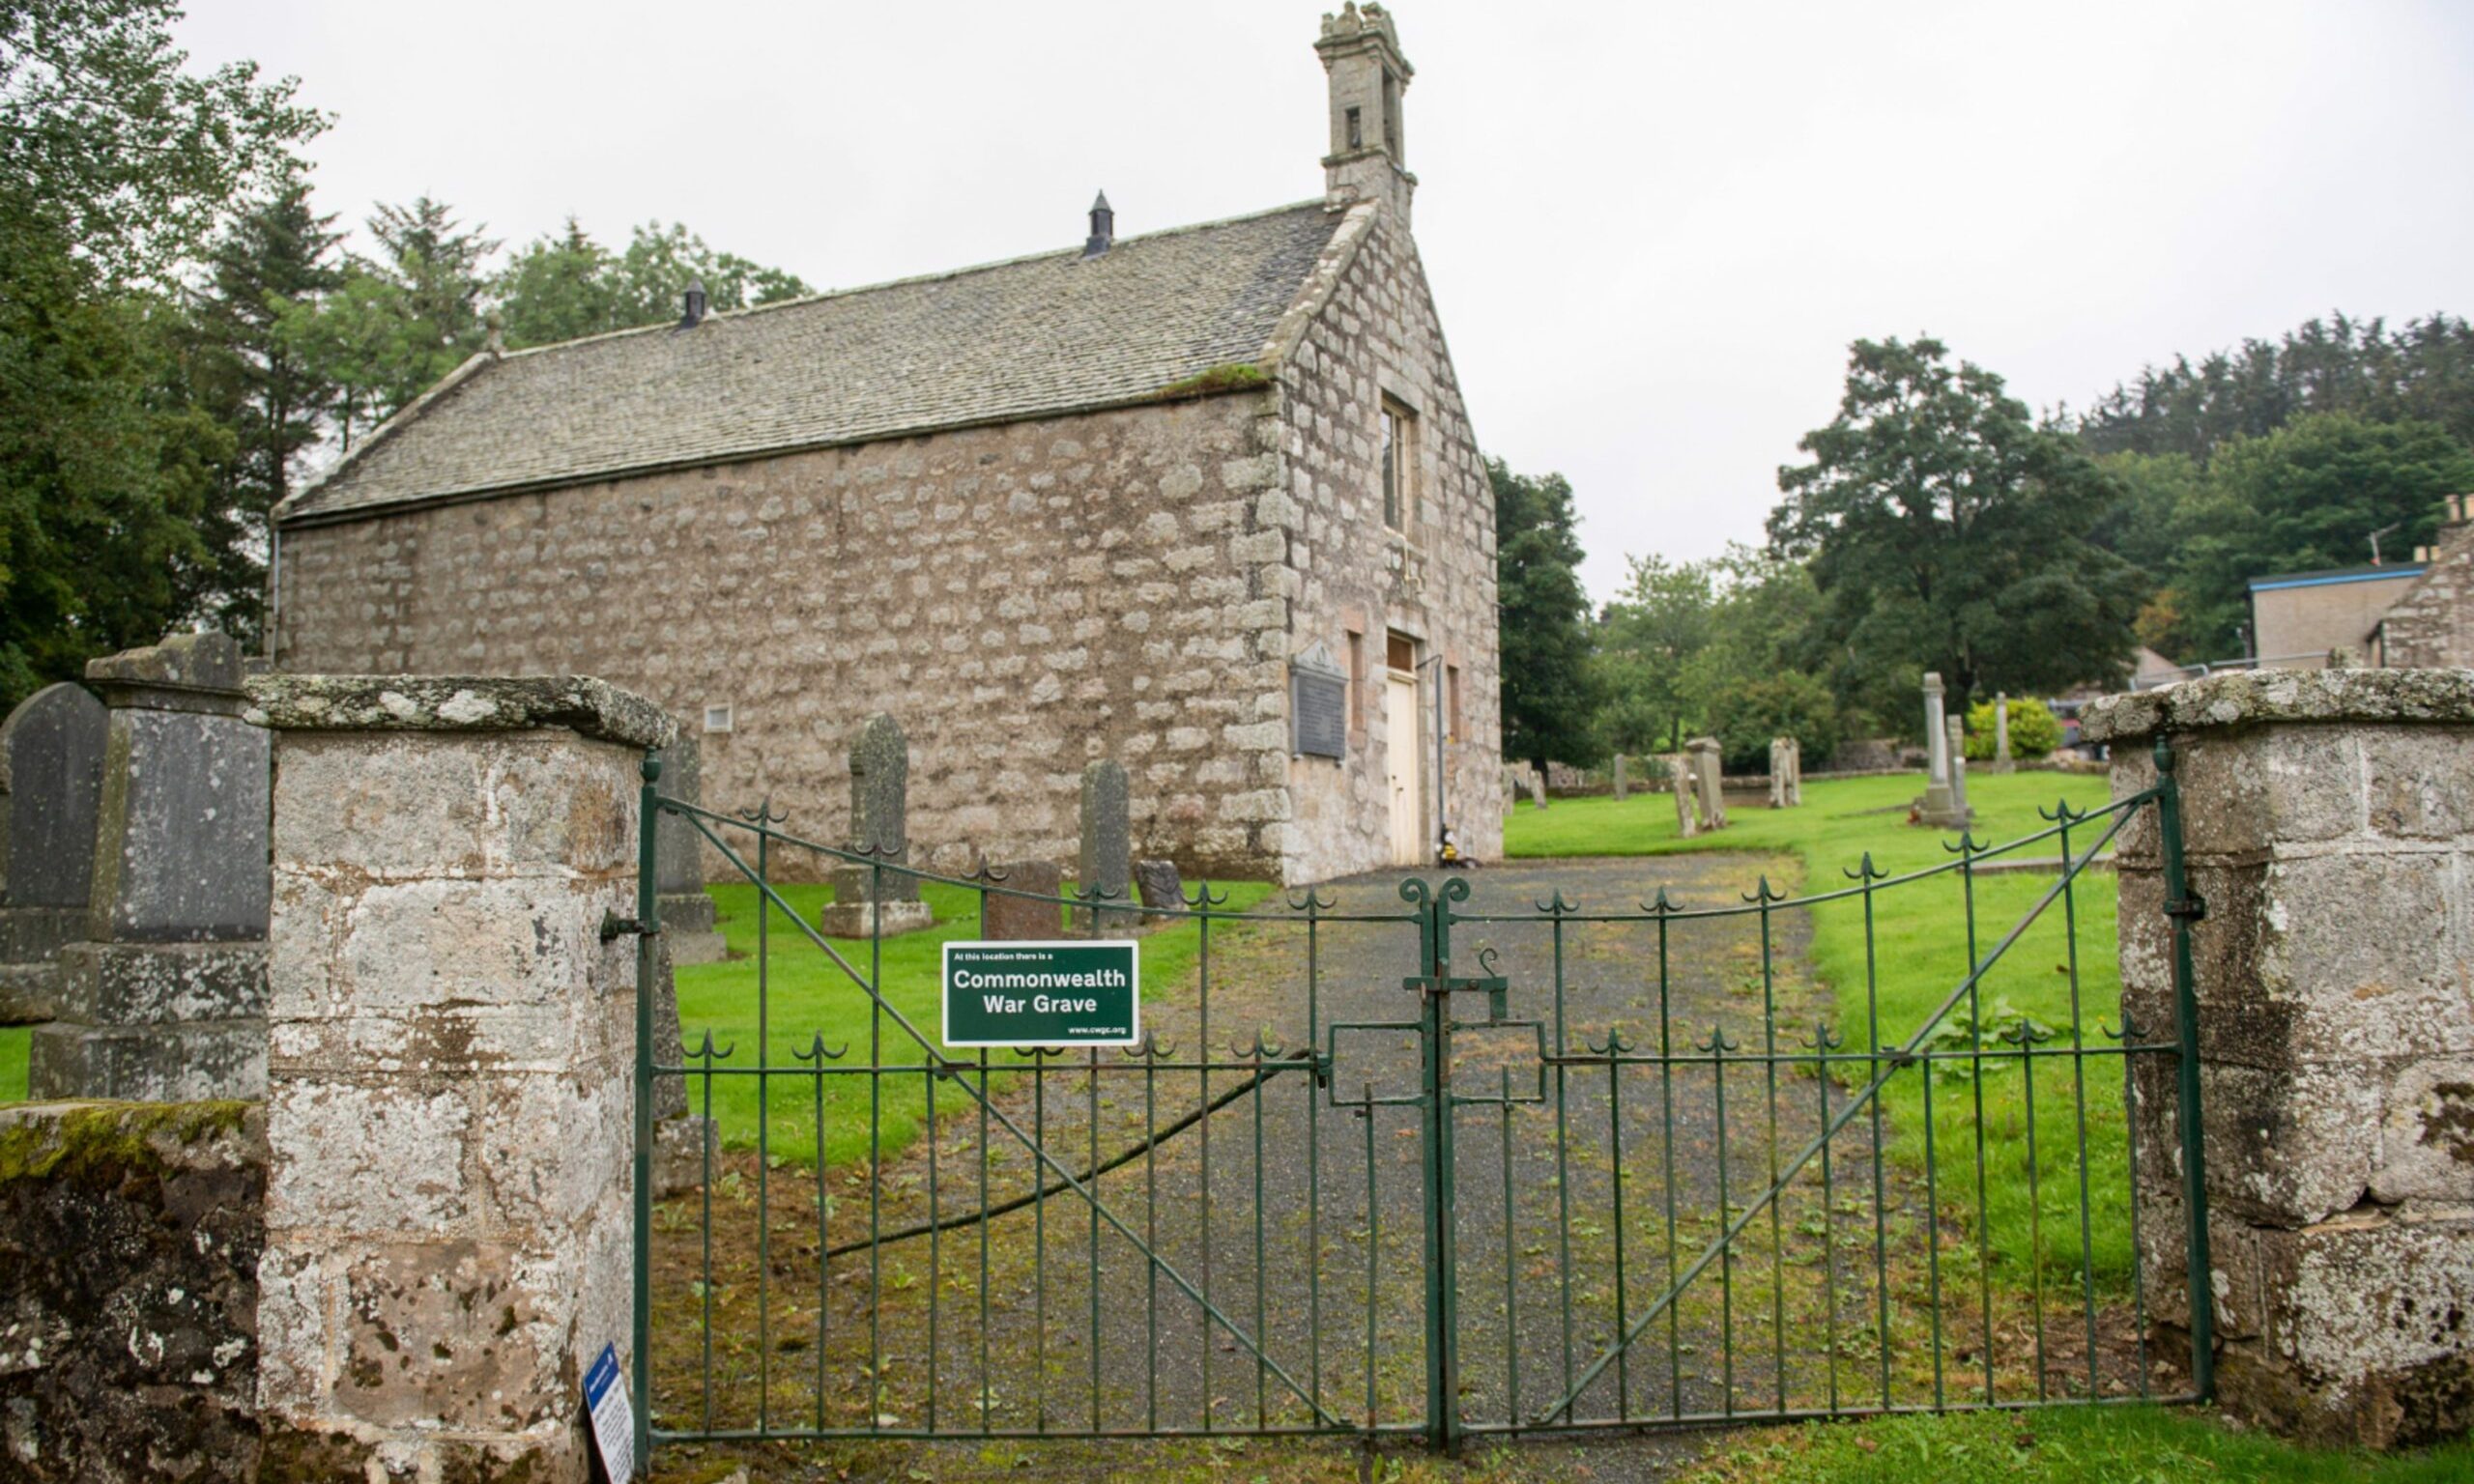 Leslie Parish Church home plans have been approved